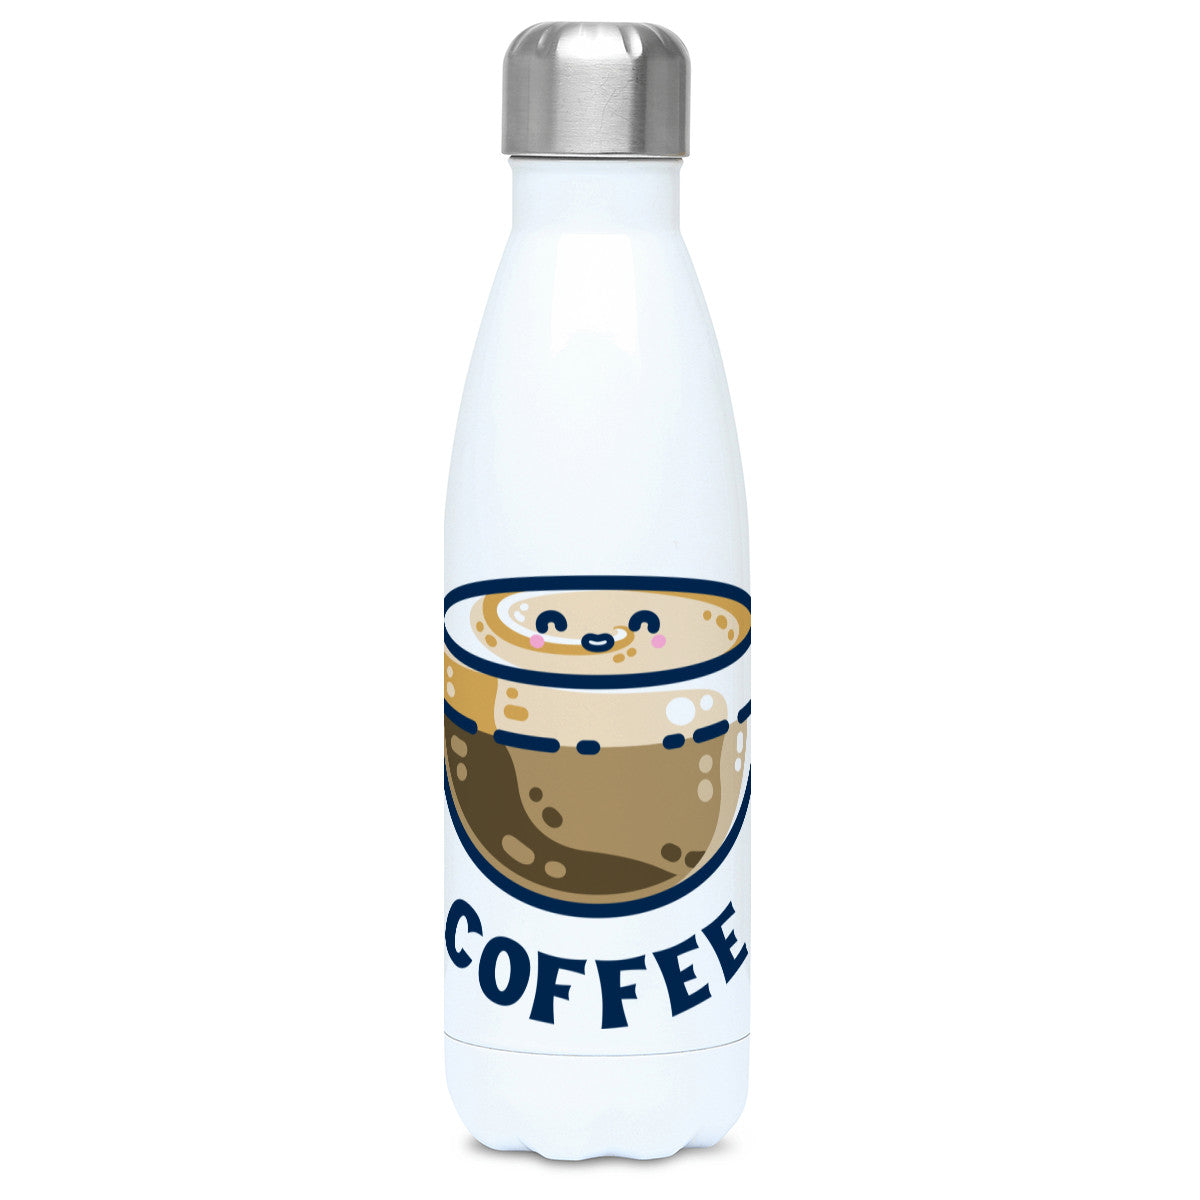 A tall white stainless steel drinks bottle seen from the front with its silver lid on and a design of a kawaii cute glass cup of coffee with a thick creamy layer at the top and a smiling face in the cream on the top. The word coffee is in capital letters beneath.